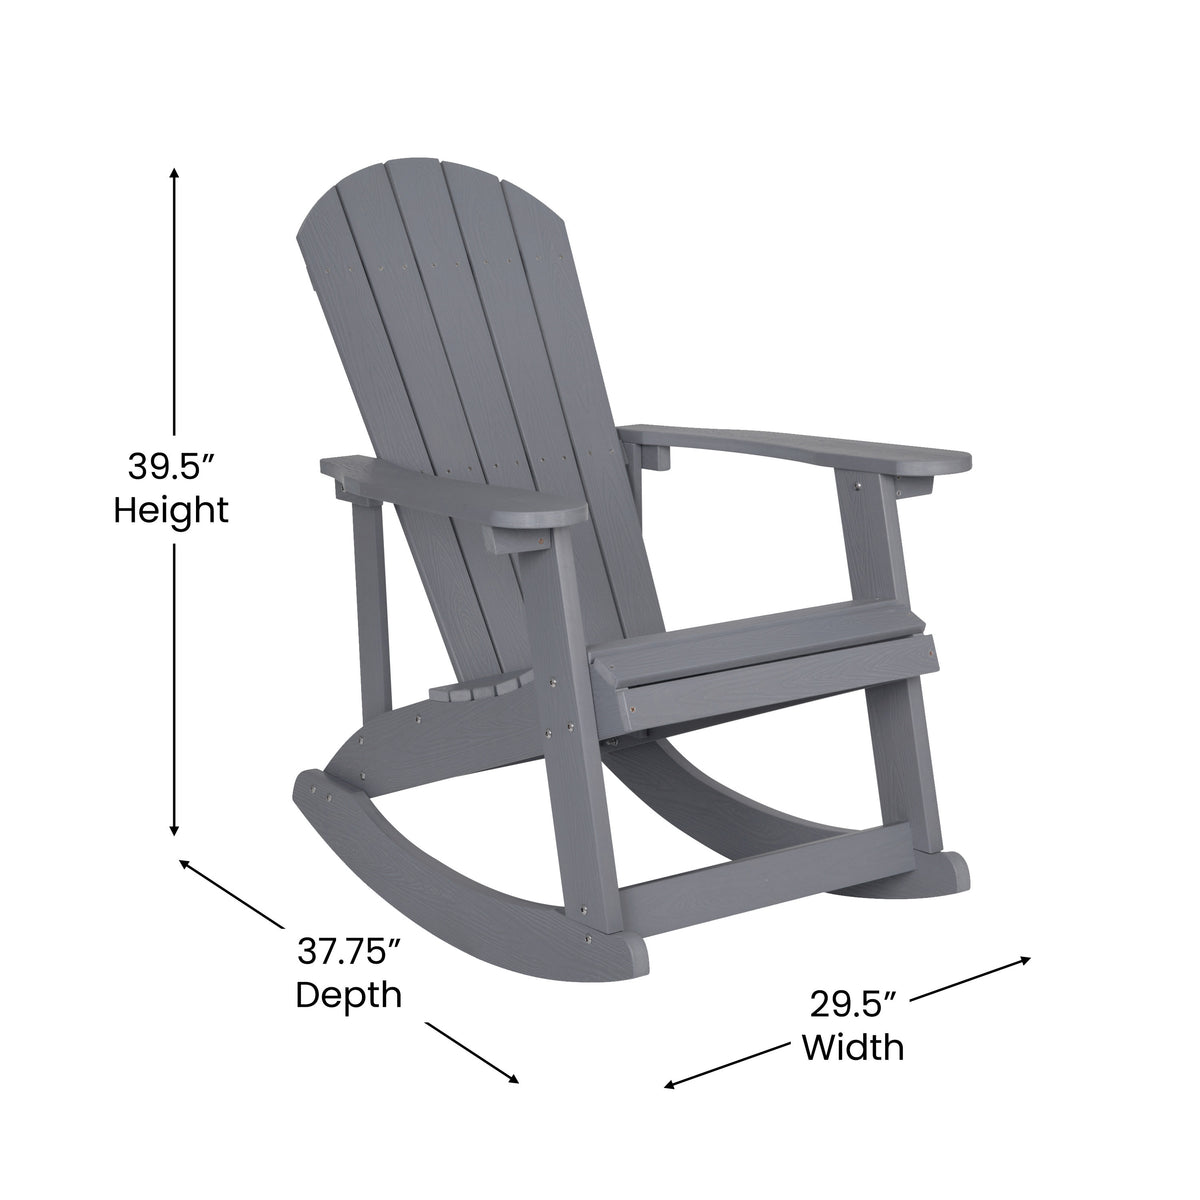 Gray |#| Indoor/Outdoor Gray Rocking Adirondack Chairs with Gray Cushions - Set of 2